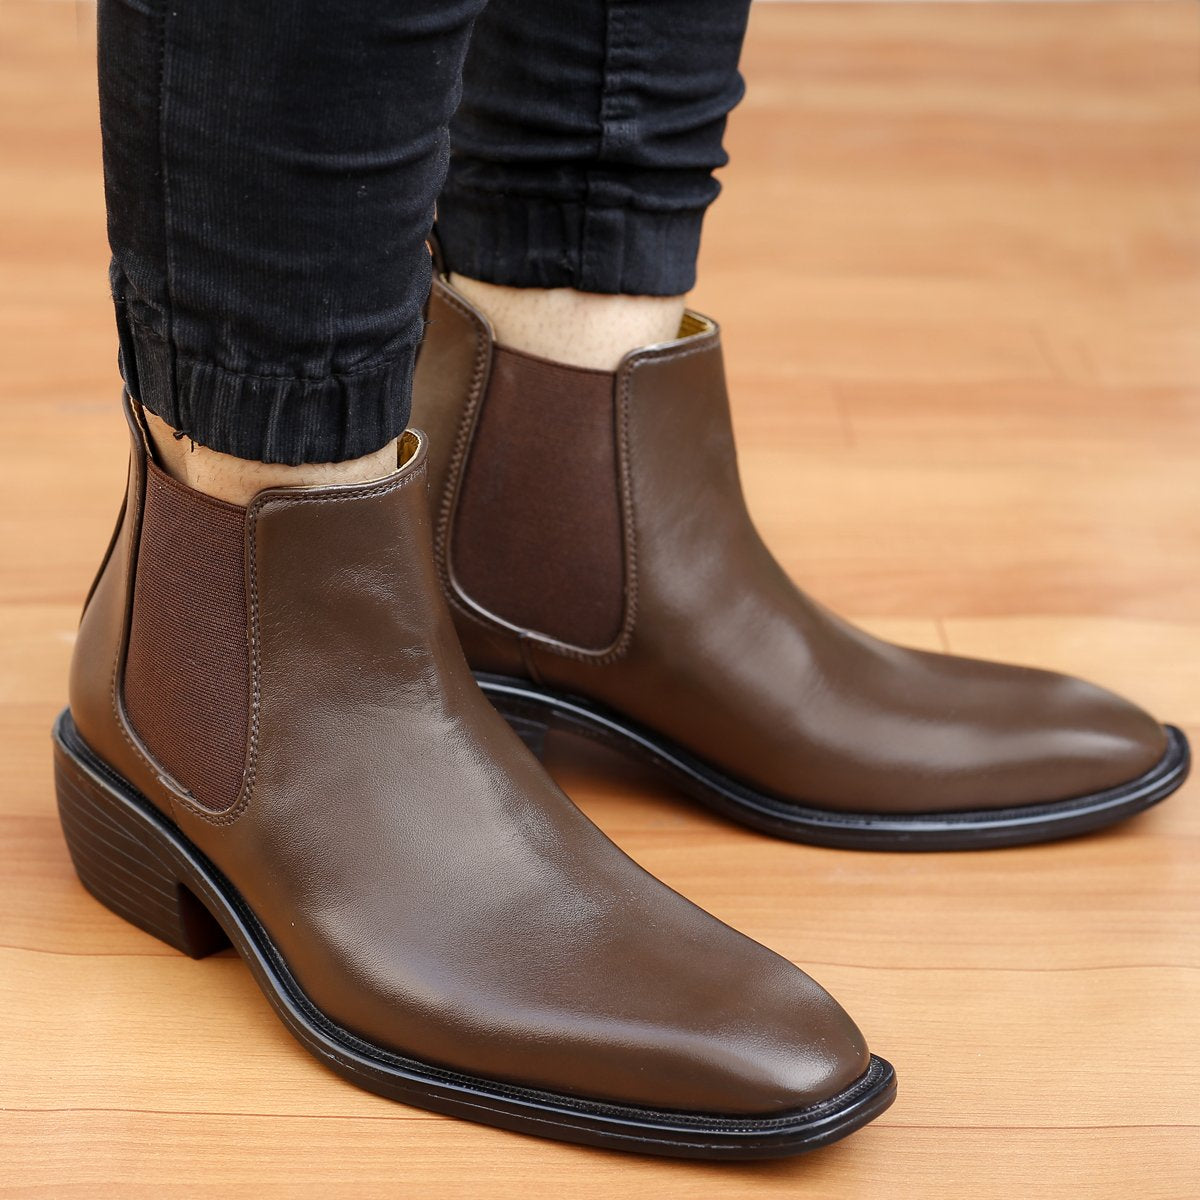 Men's Stylish Brown Formal and Casual Wear British Chelsea Ankle Boots